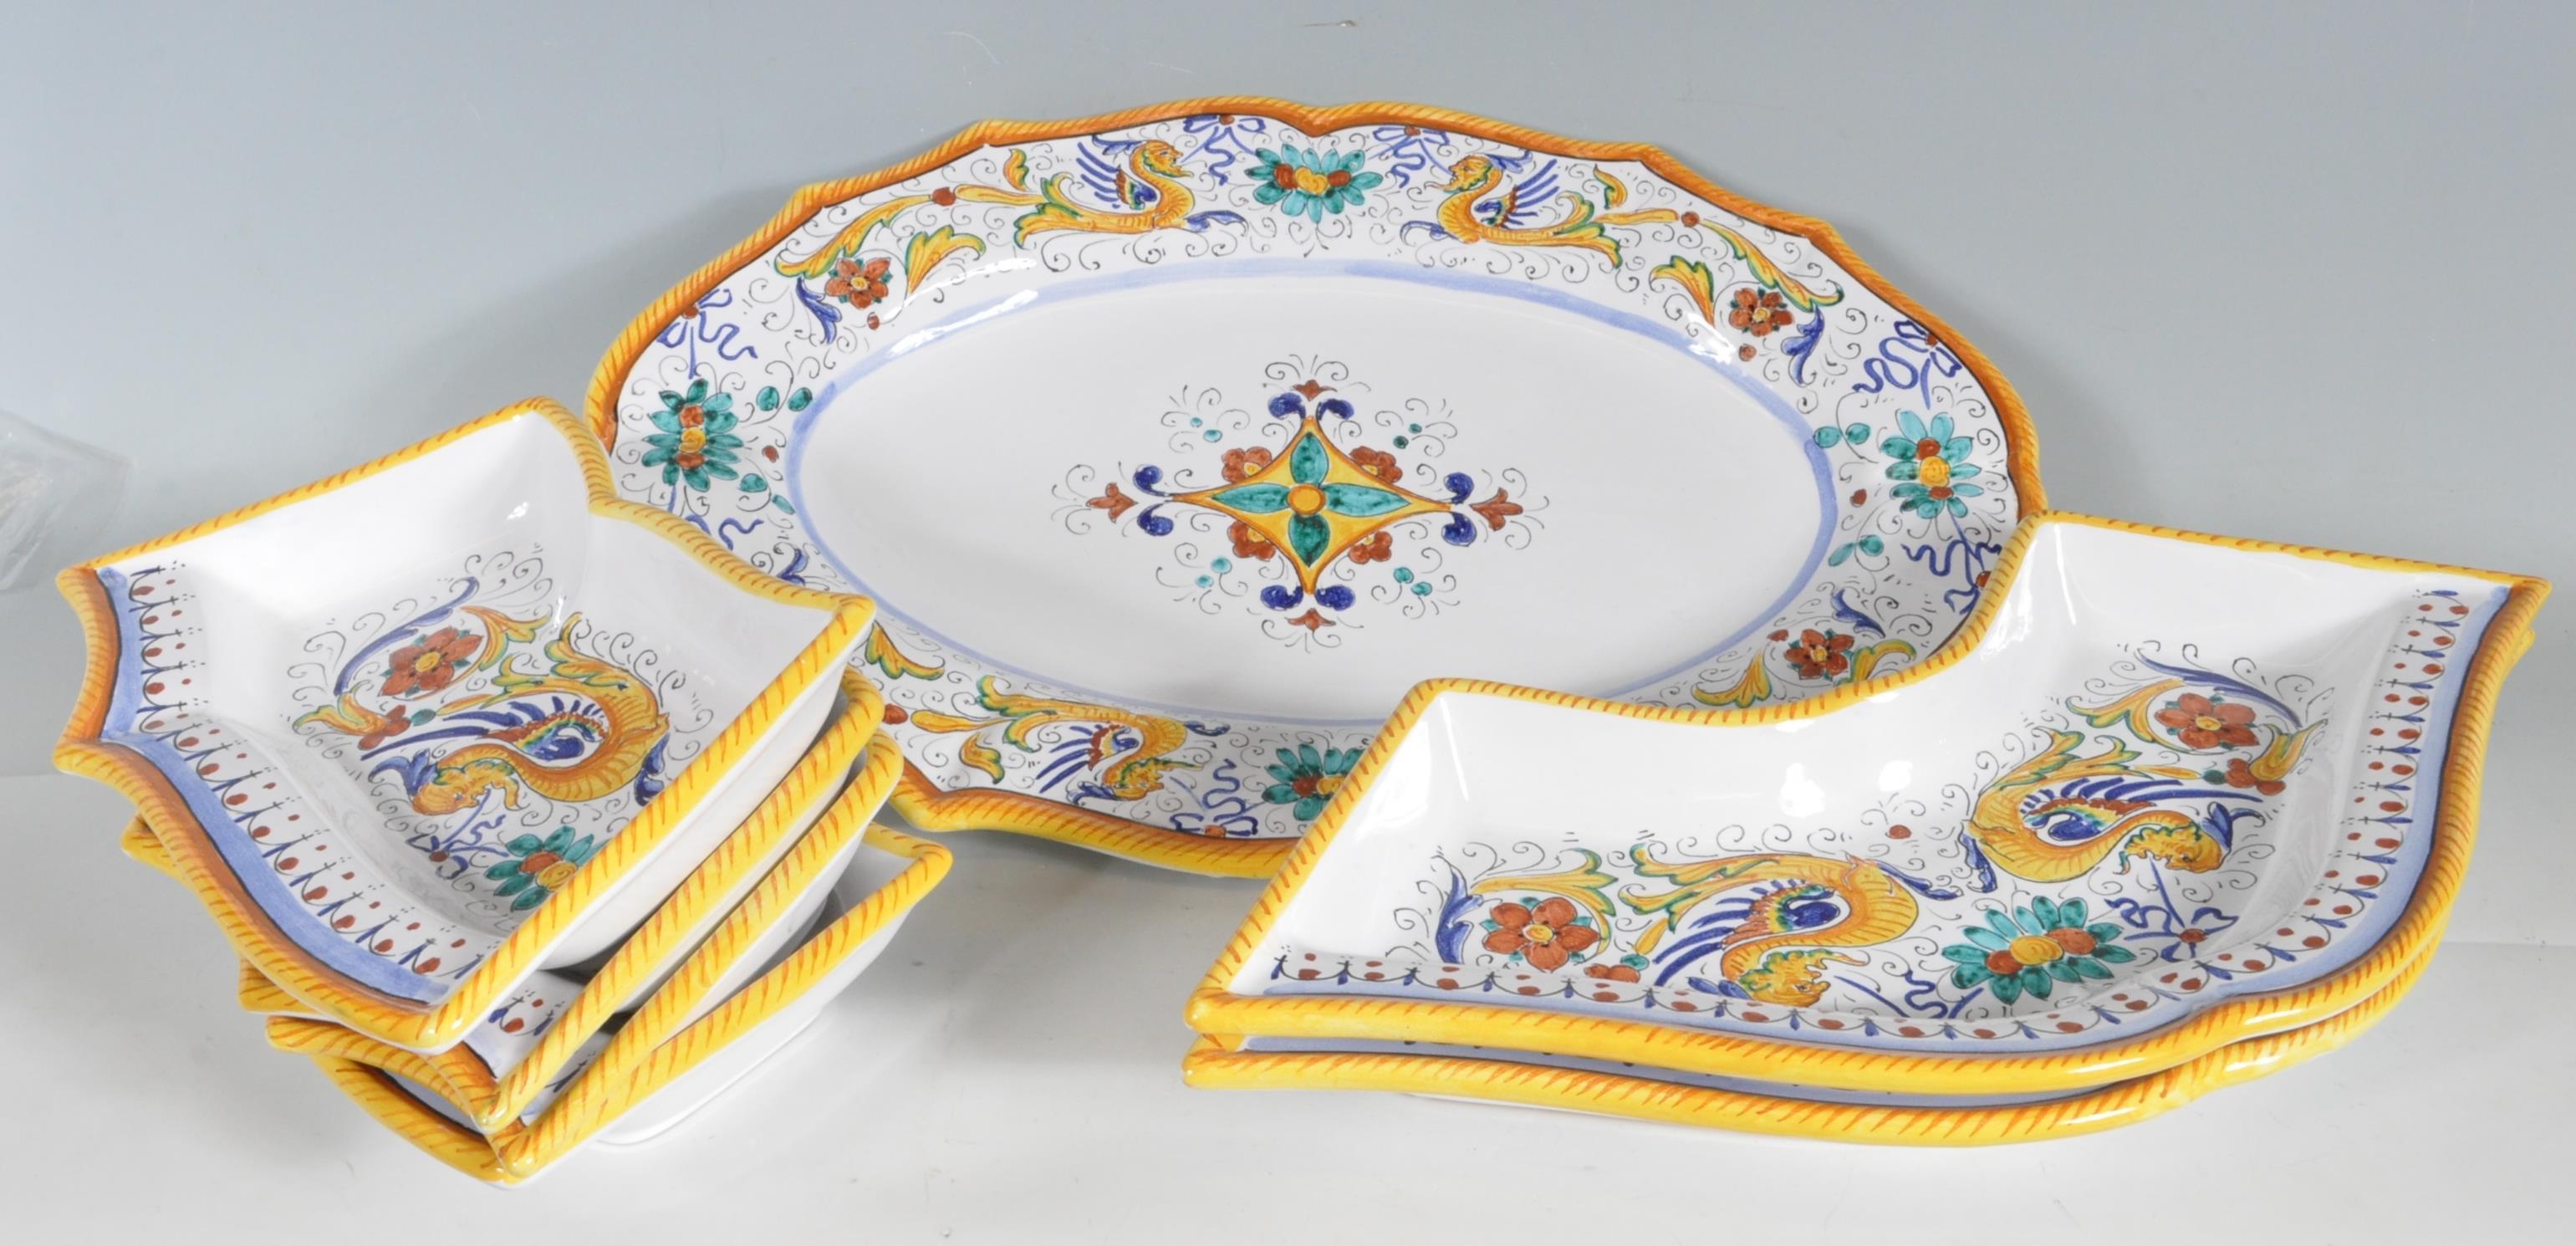 GROUP OF SPANISH FAIENCE SERVING PLATES